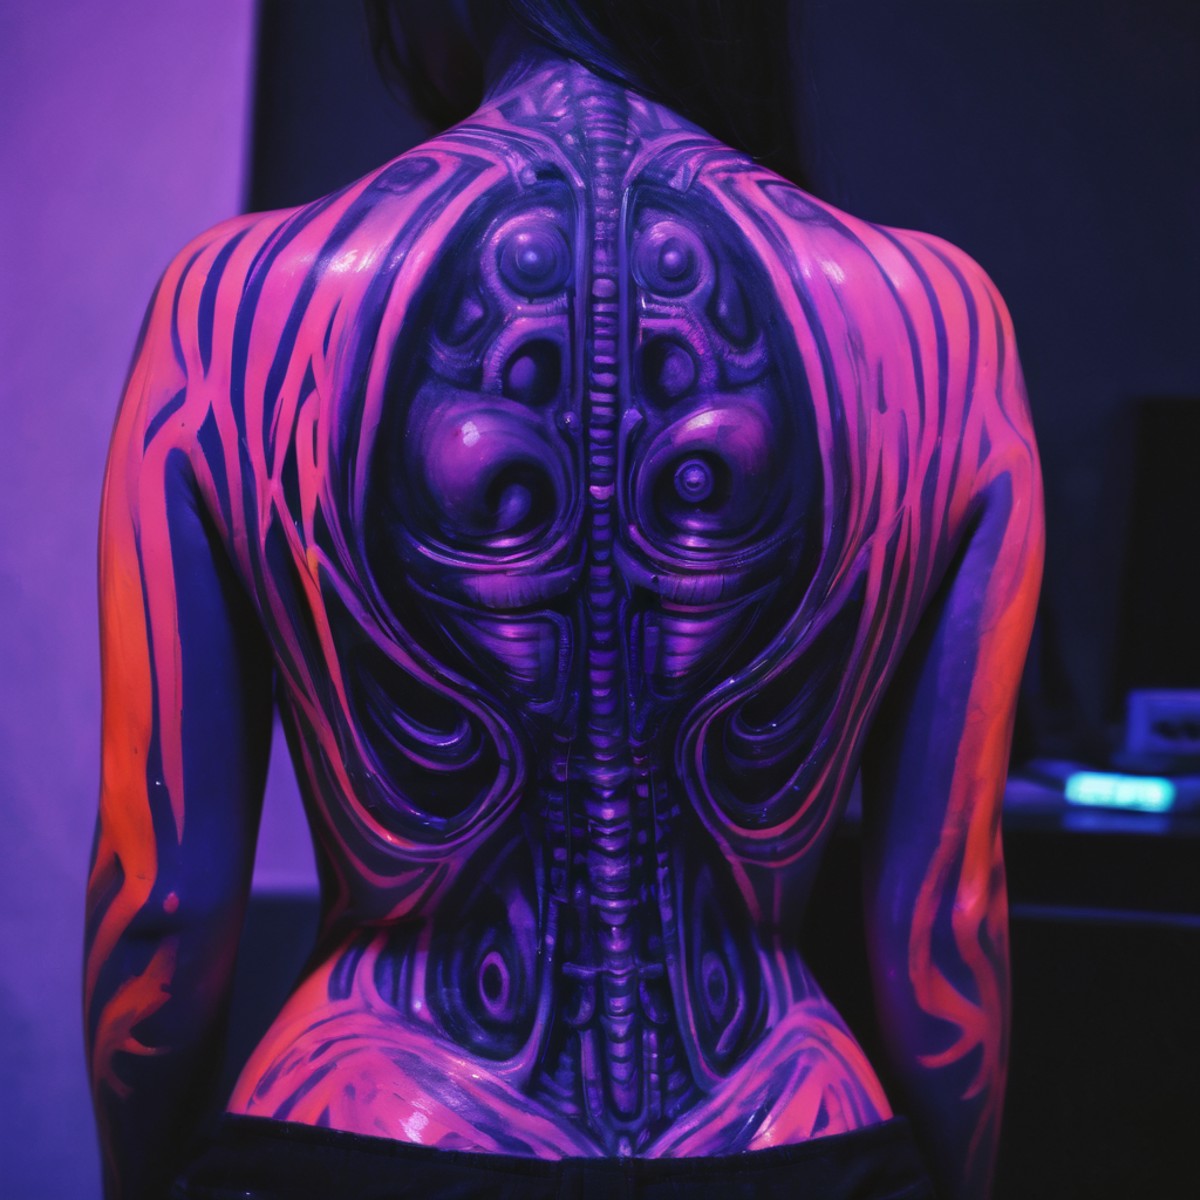 blacklight uv painted on the back of a girl depicting art in the style of H. R. Giger